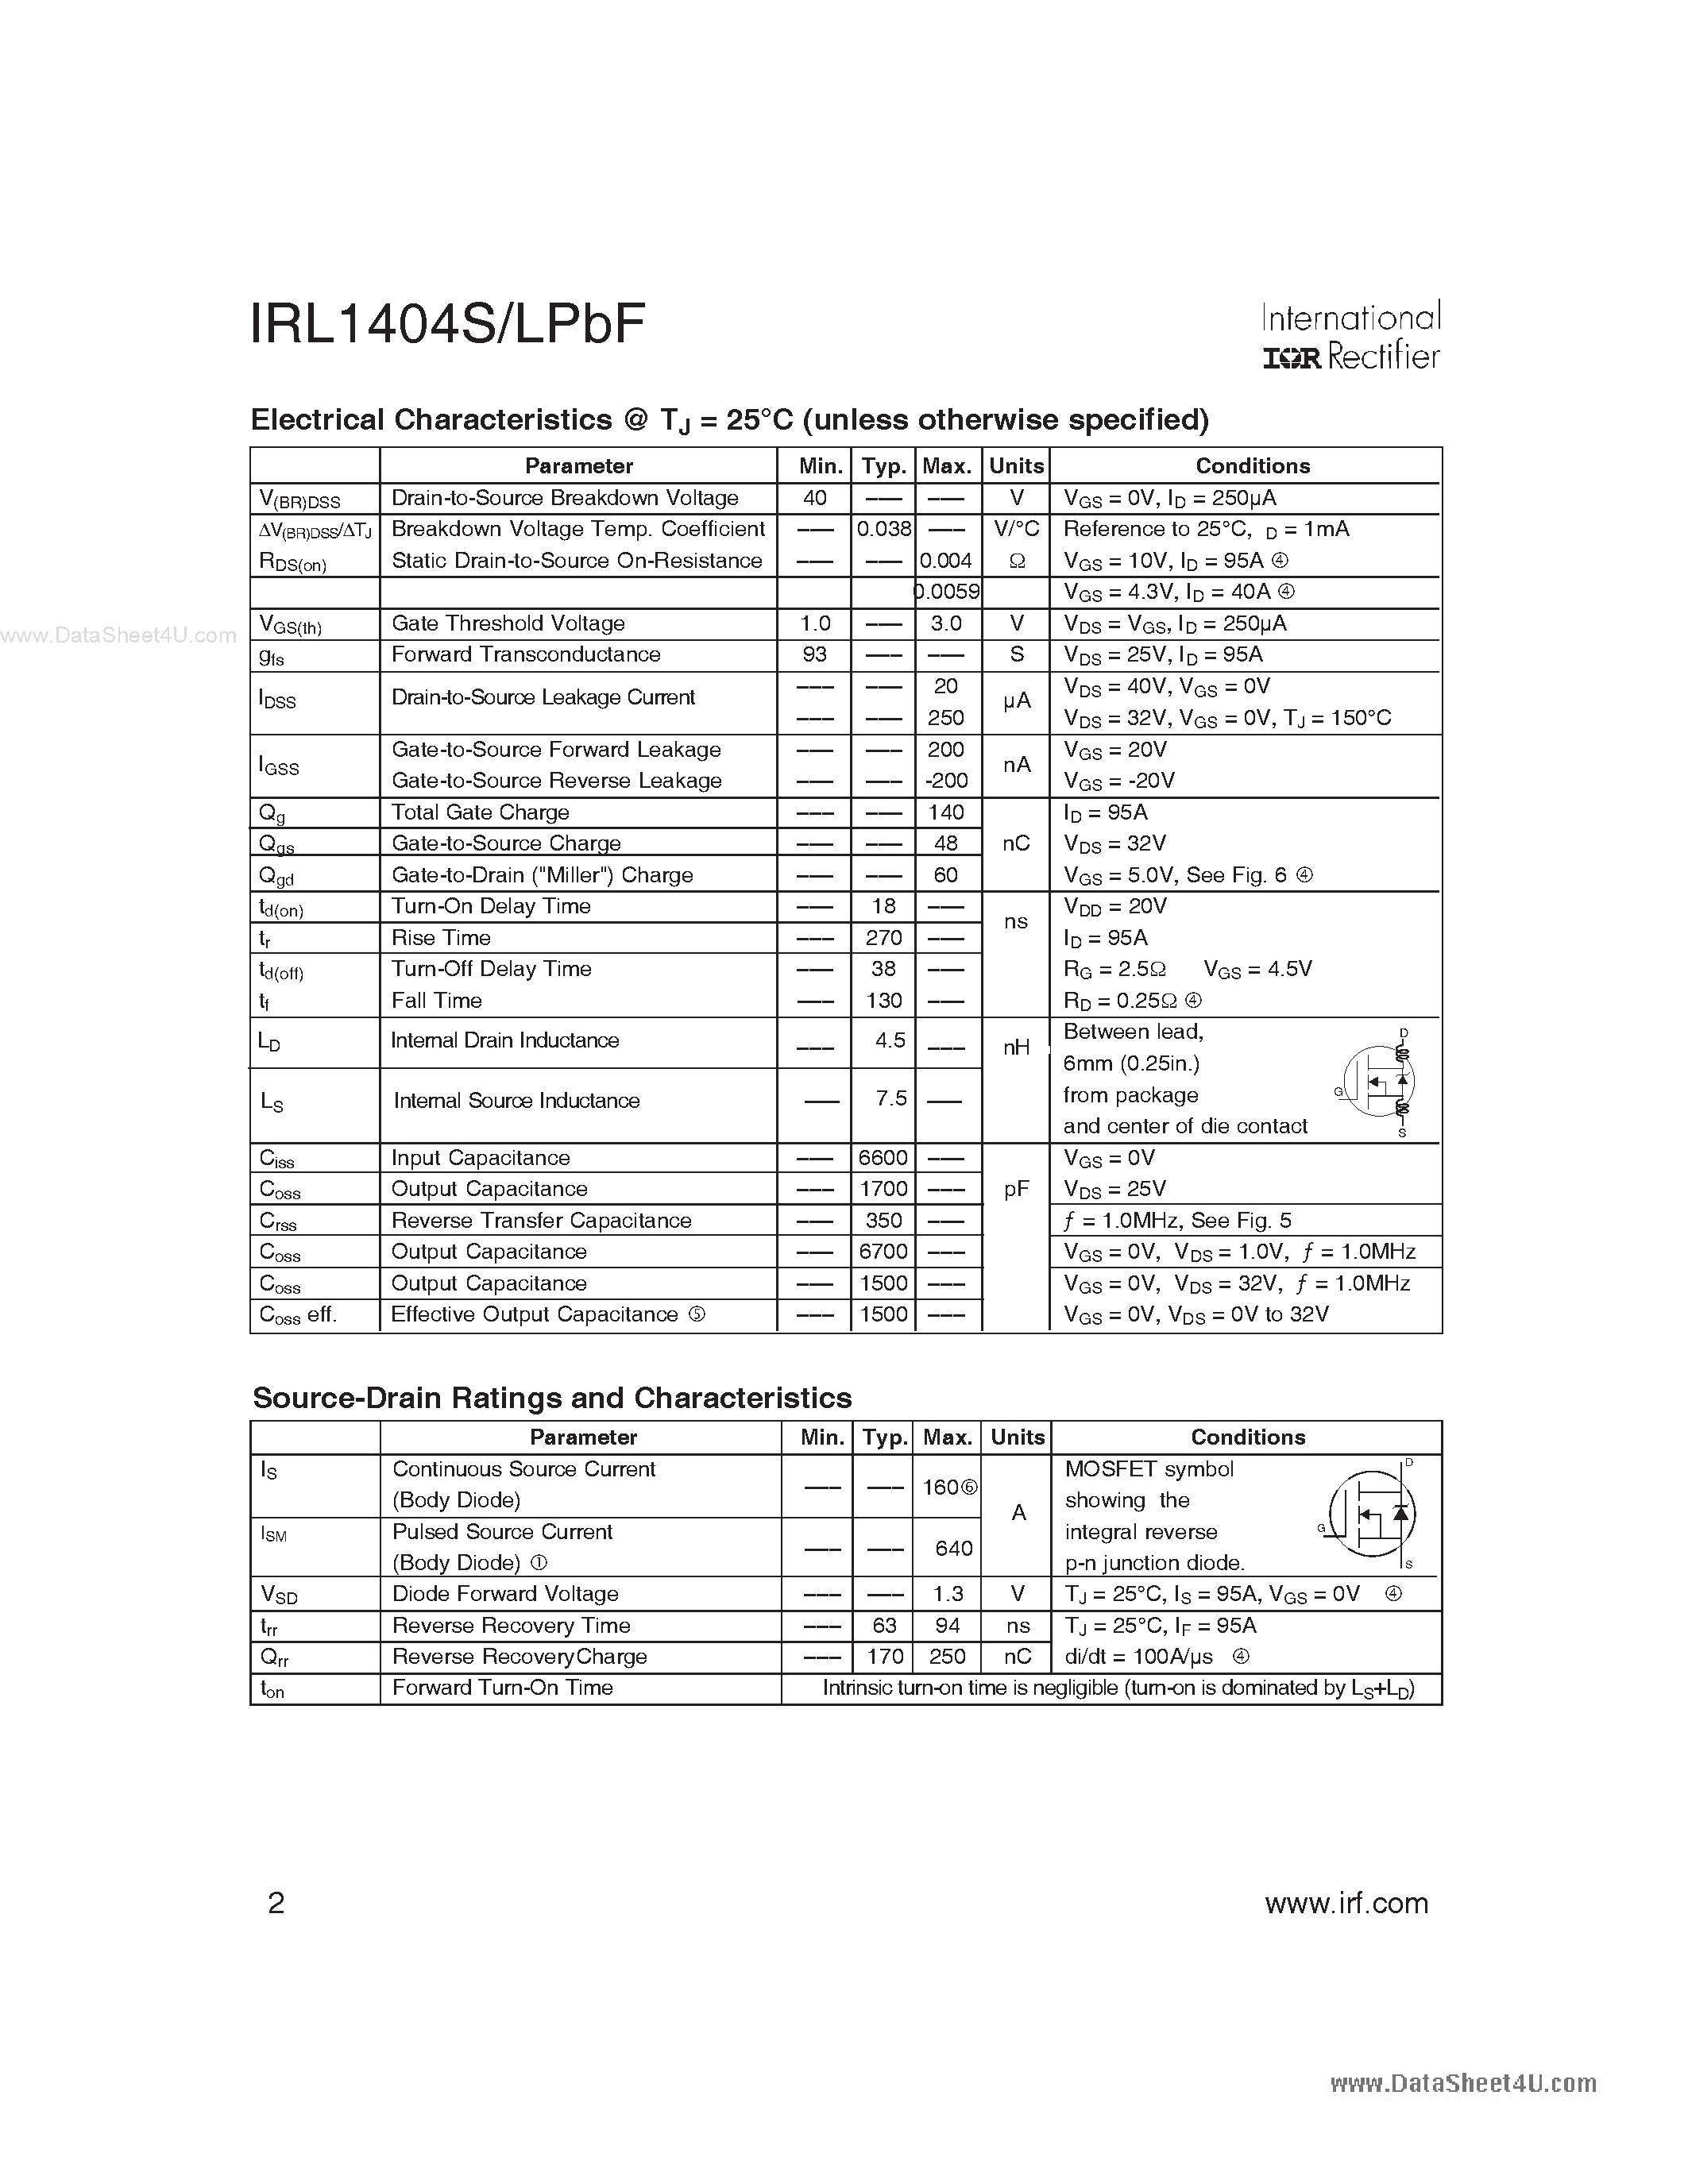 Datasheet IRL1404LPBF - Power MOSFET page 2